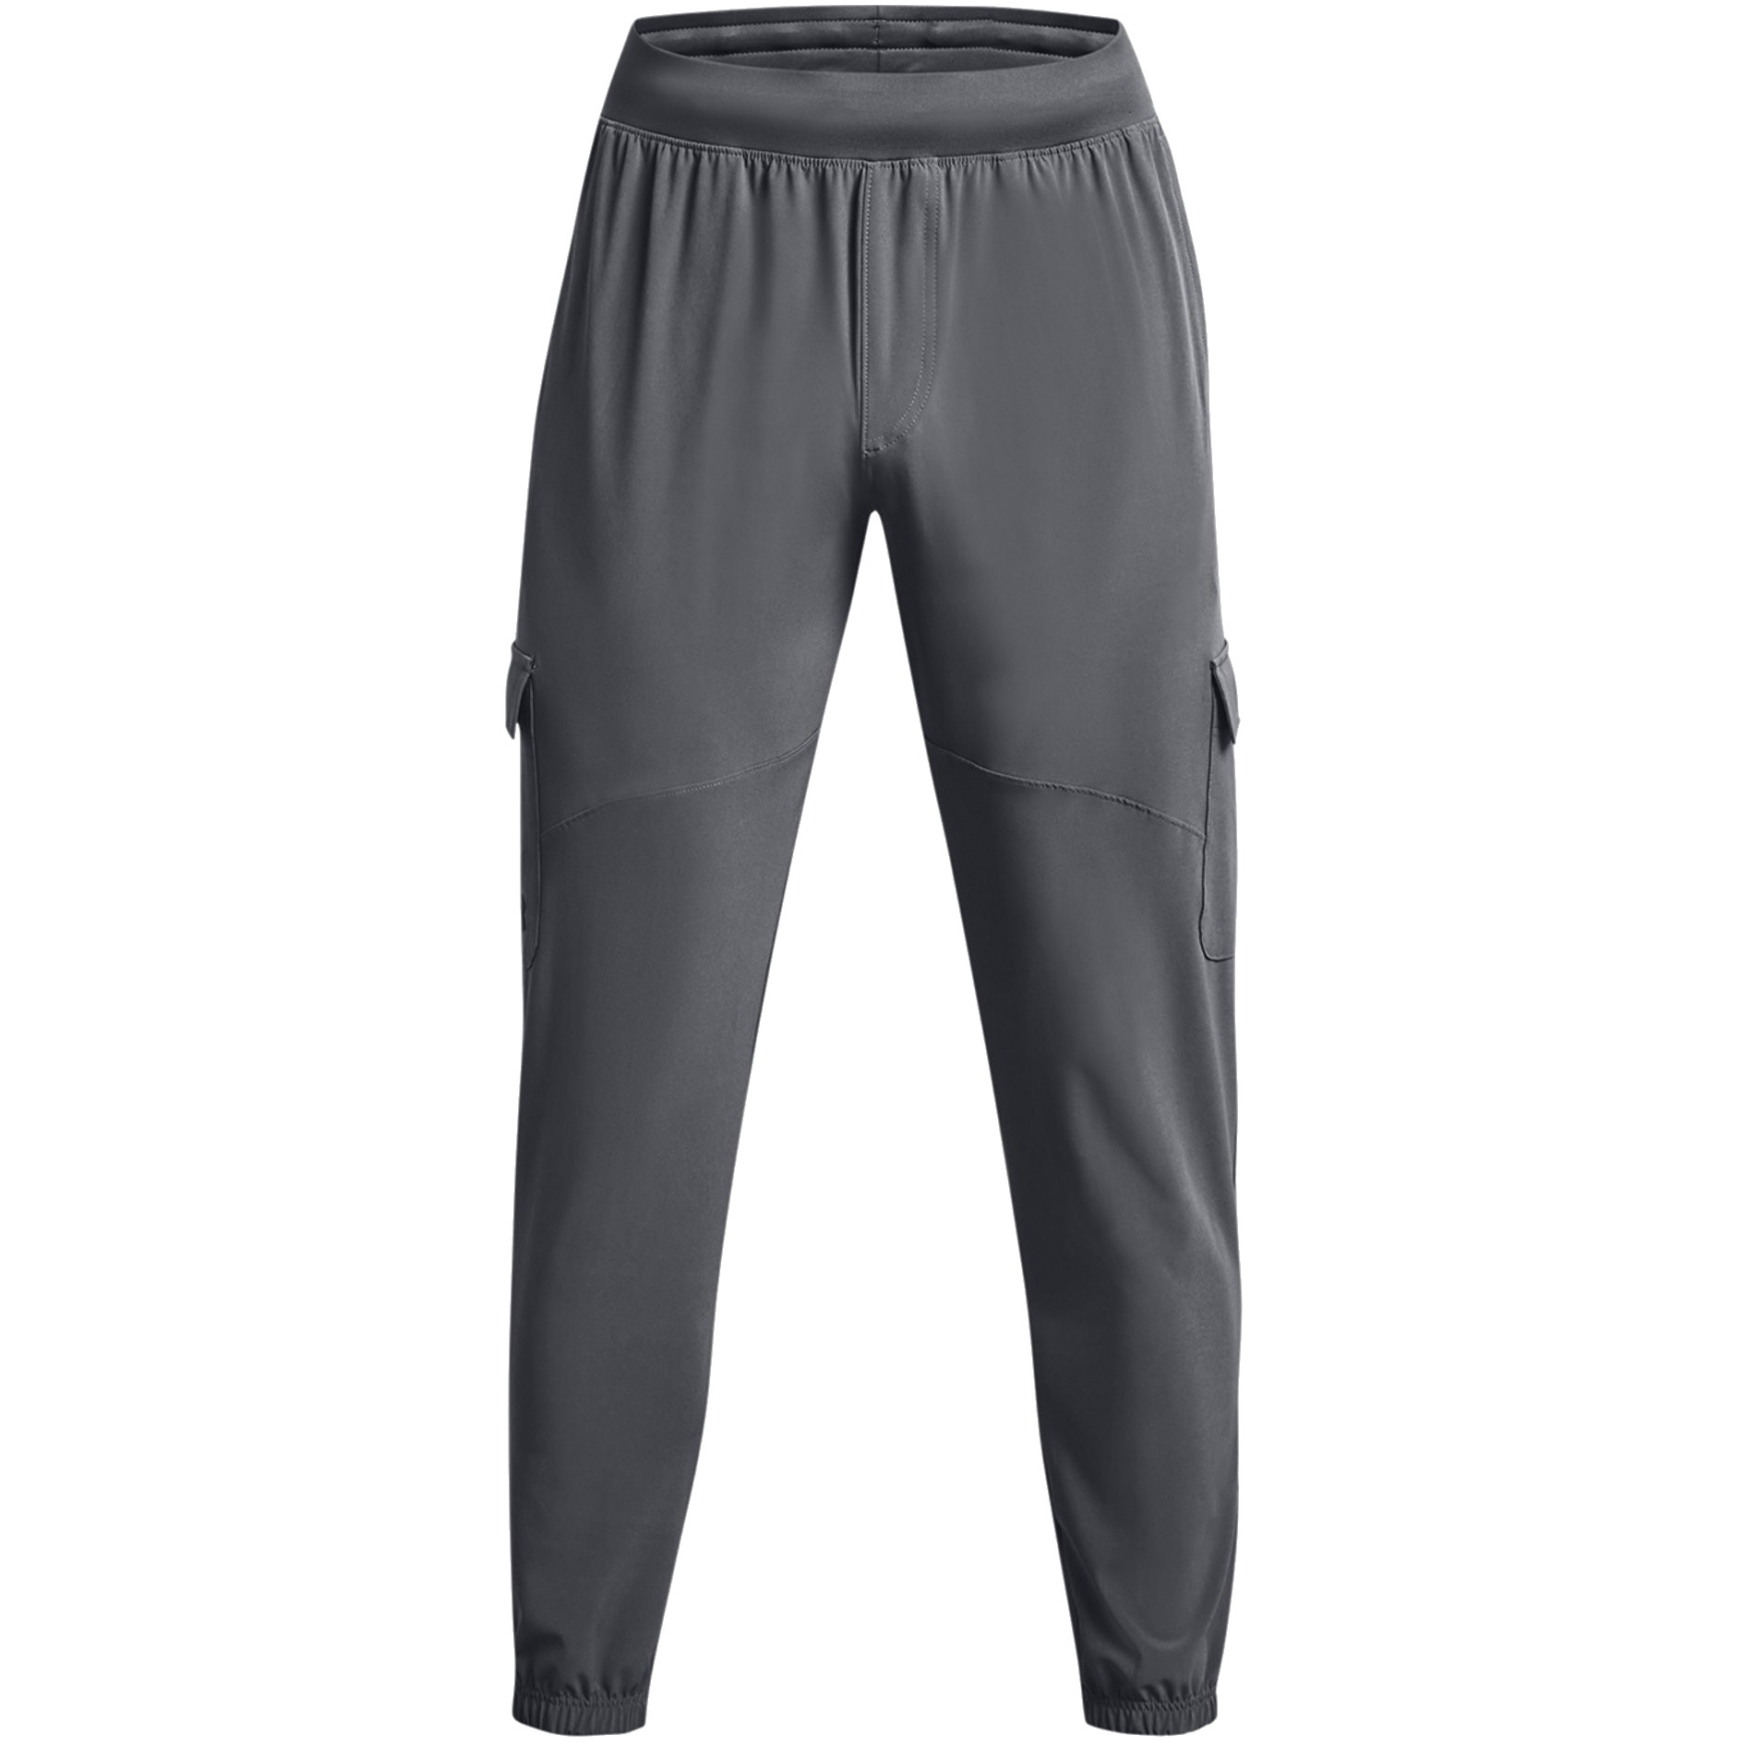 Under Armour Ripstop Woven Pants Black/Pitch Gray 1366214-001 at